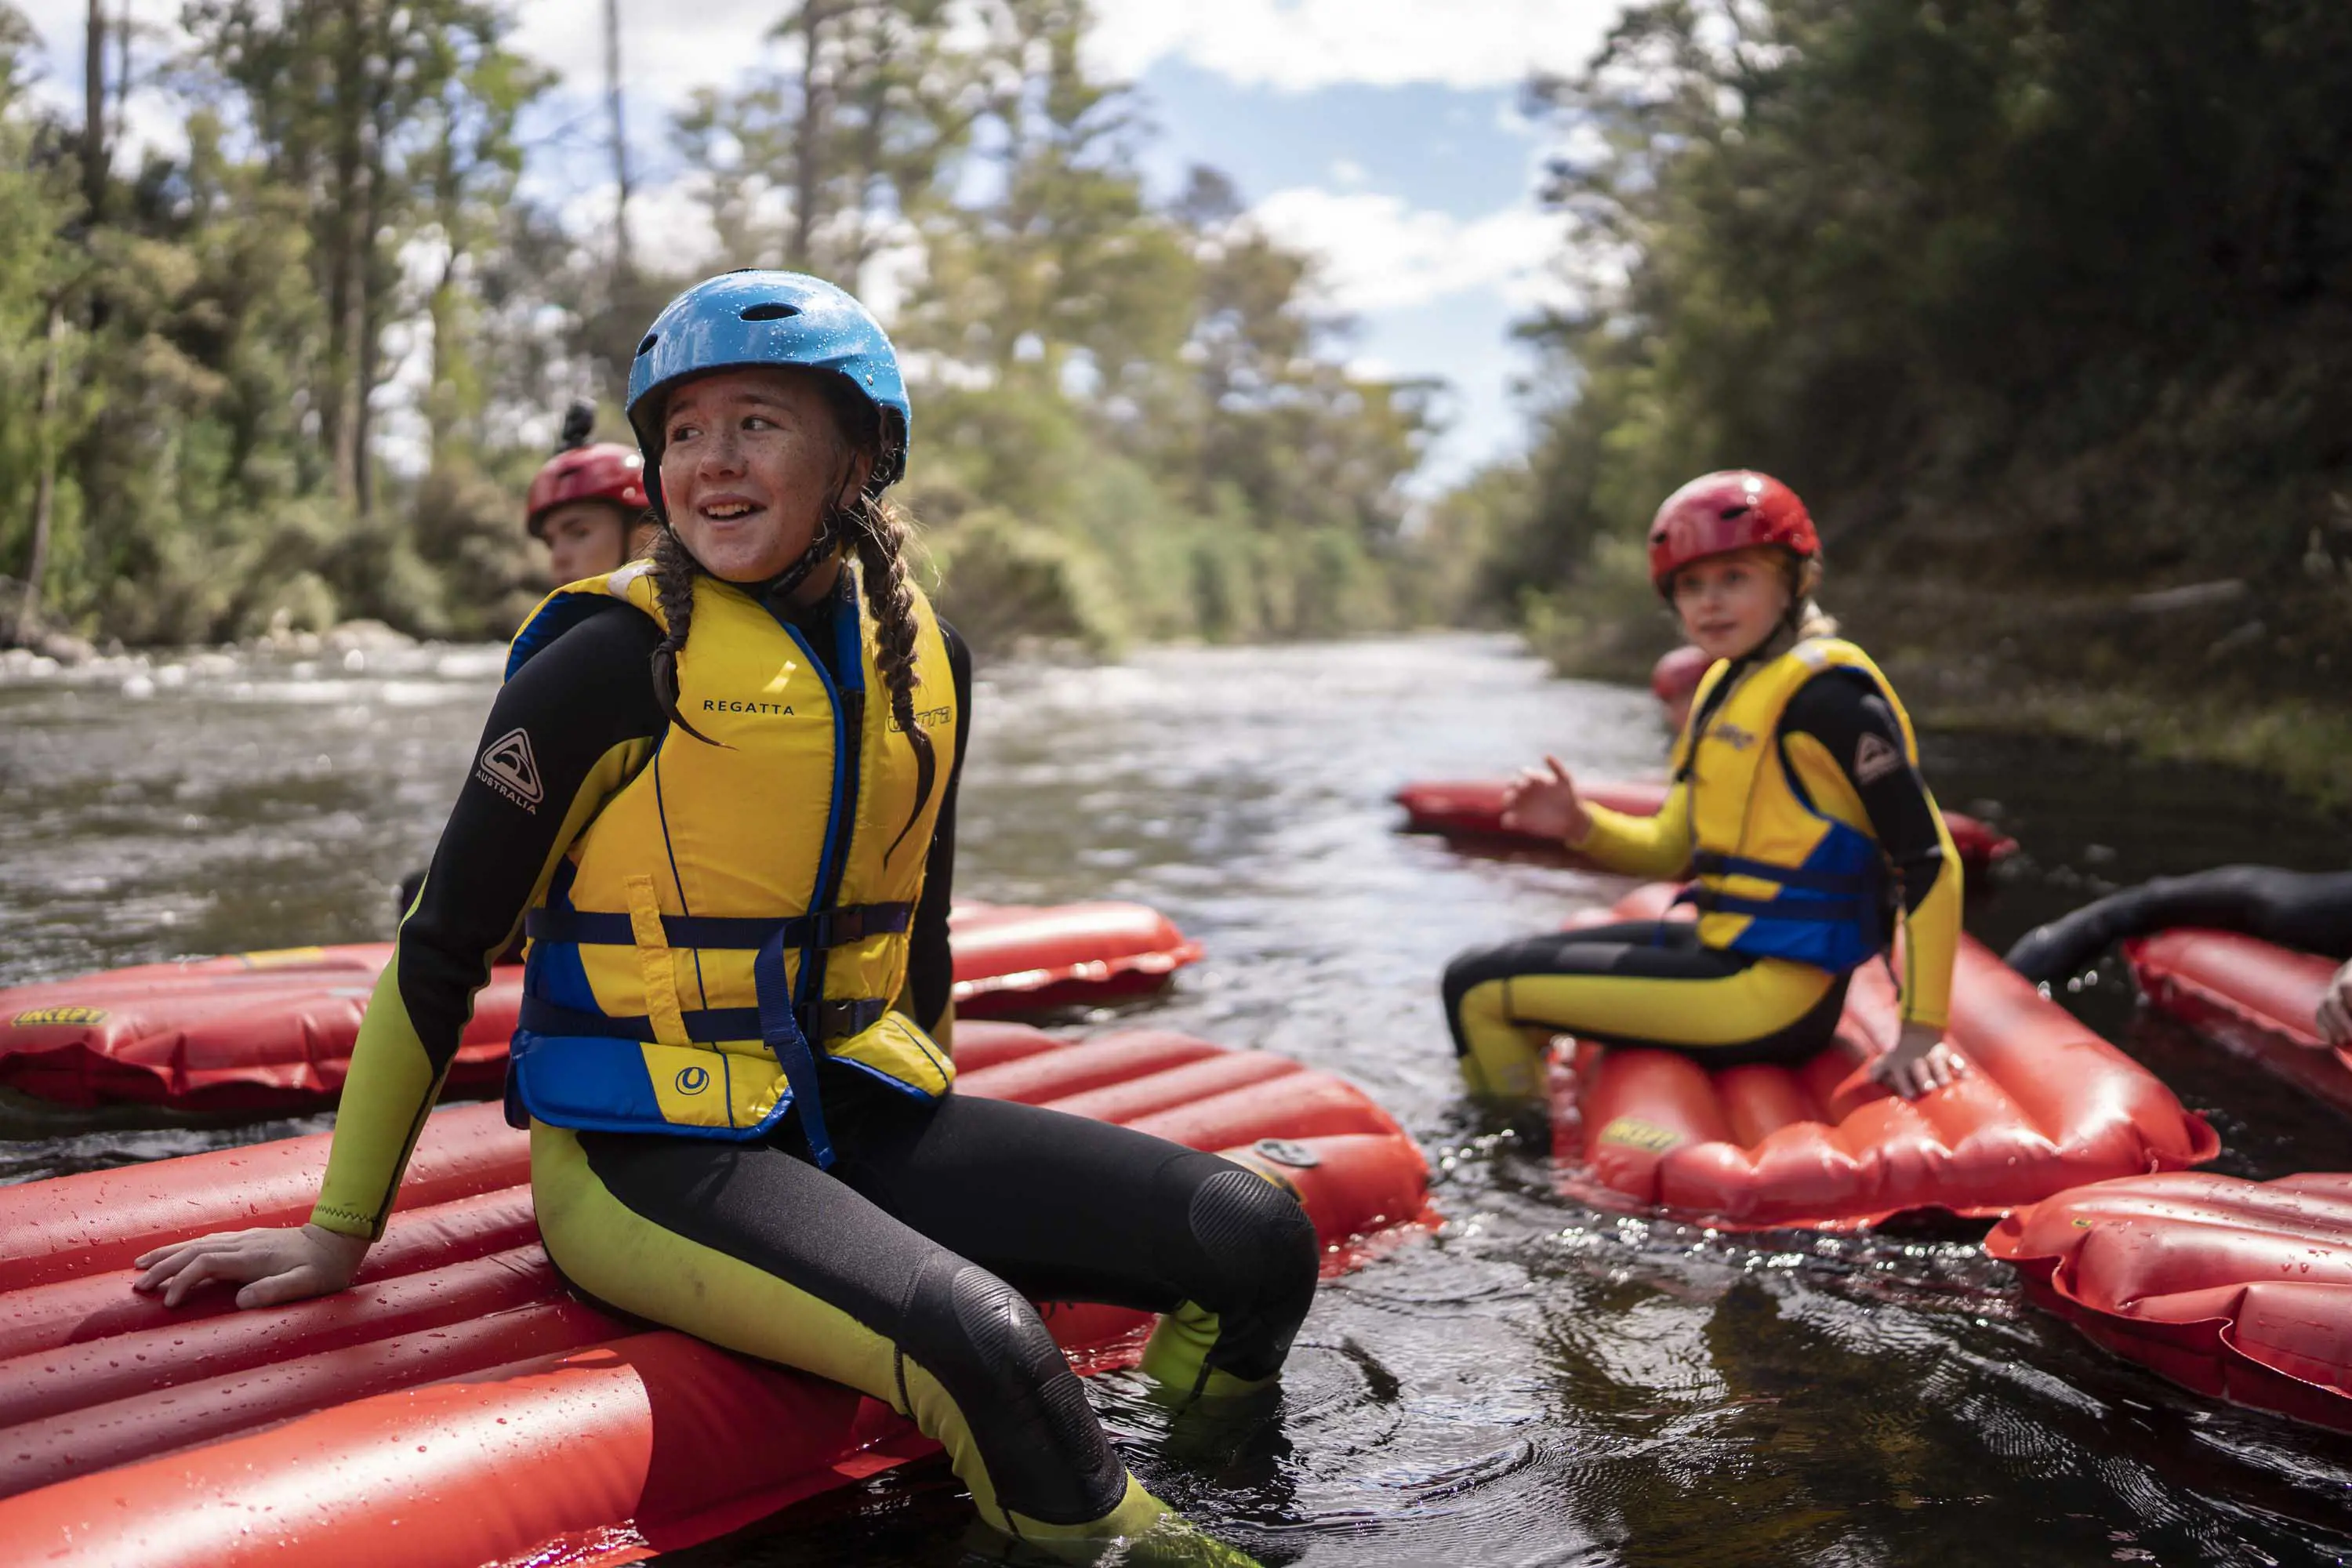 Children in floatation vests, wetsuits and protective head wear sit on red, inflatable plastic rafts in a river with a mild current.